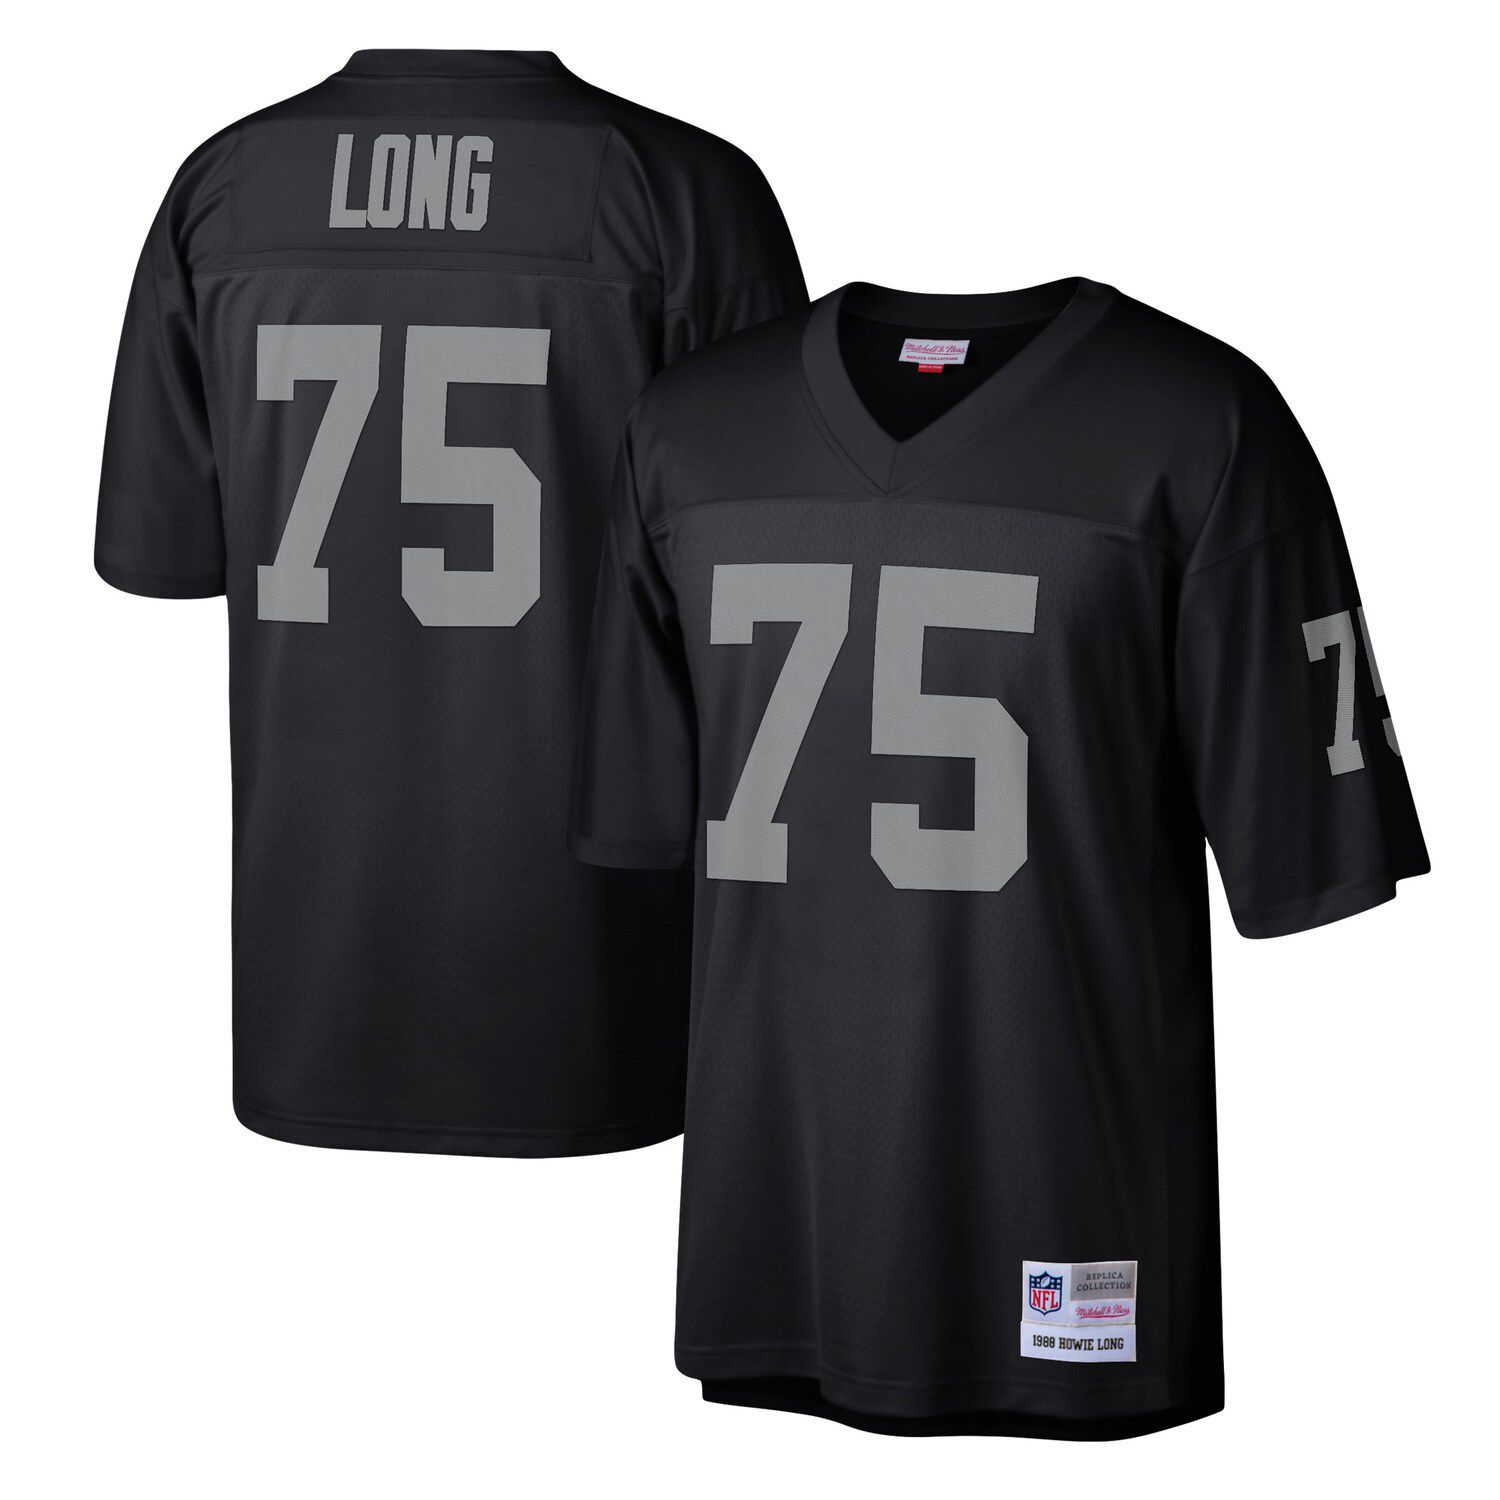 Image for Unbranded Men's Mitchell & Ness Howie Long Black Las Vegas Raiders Legacy Replica Jersey at Kohl's.